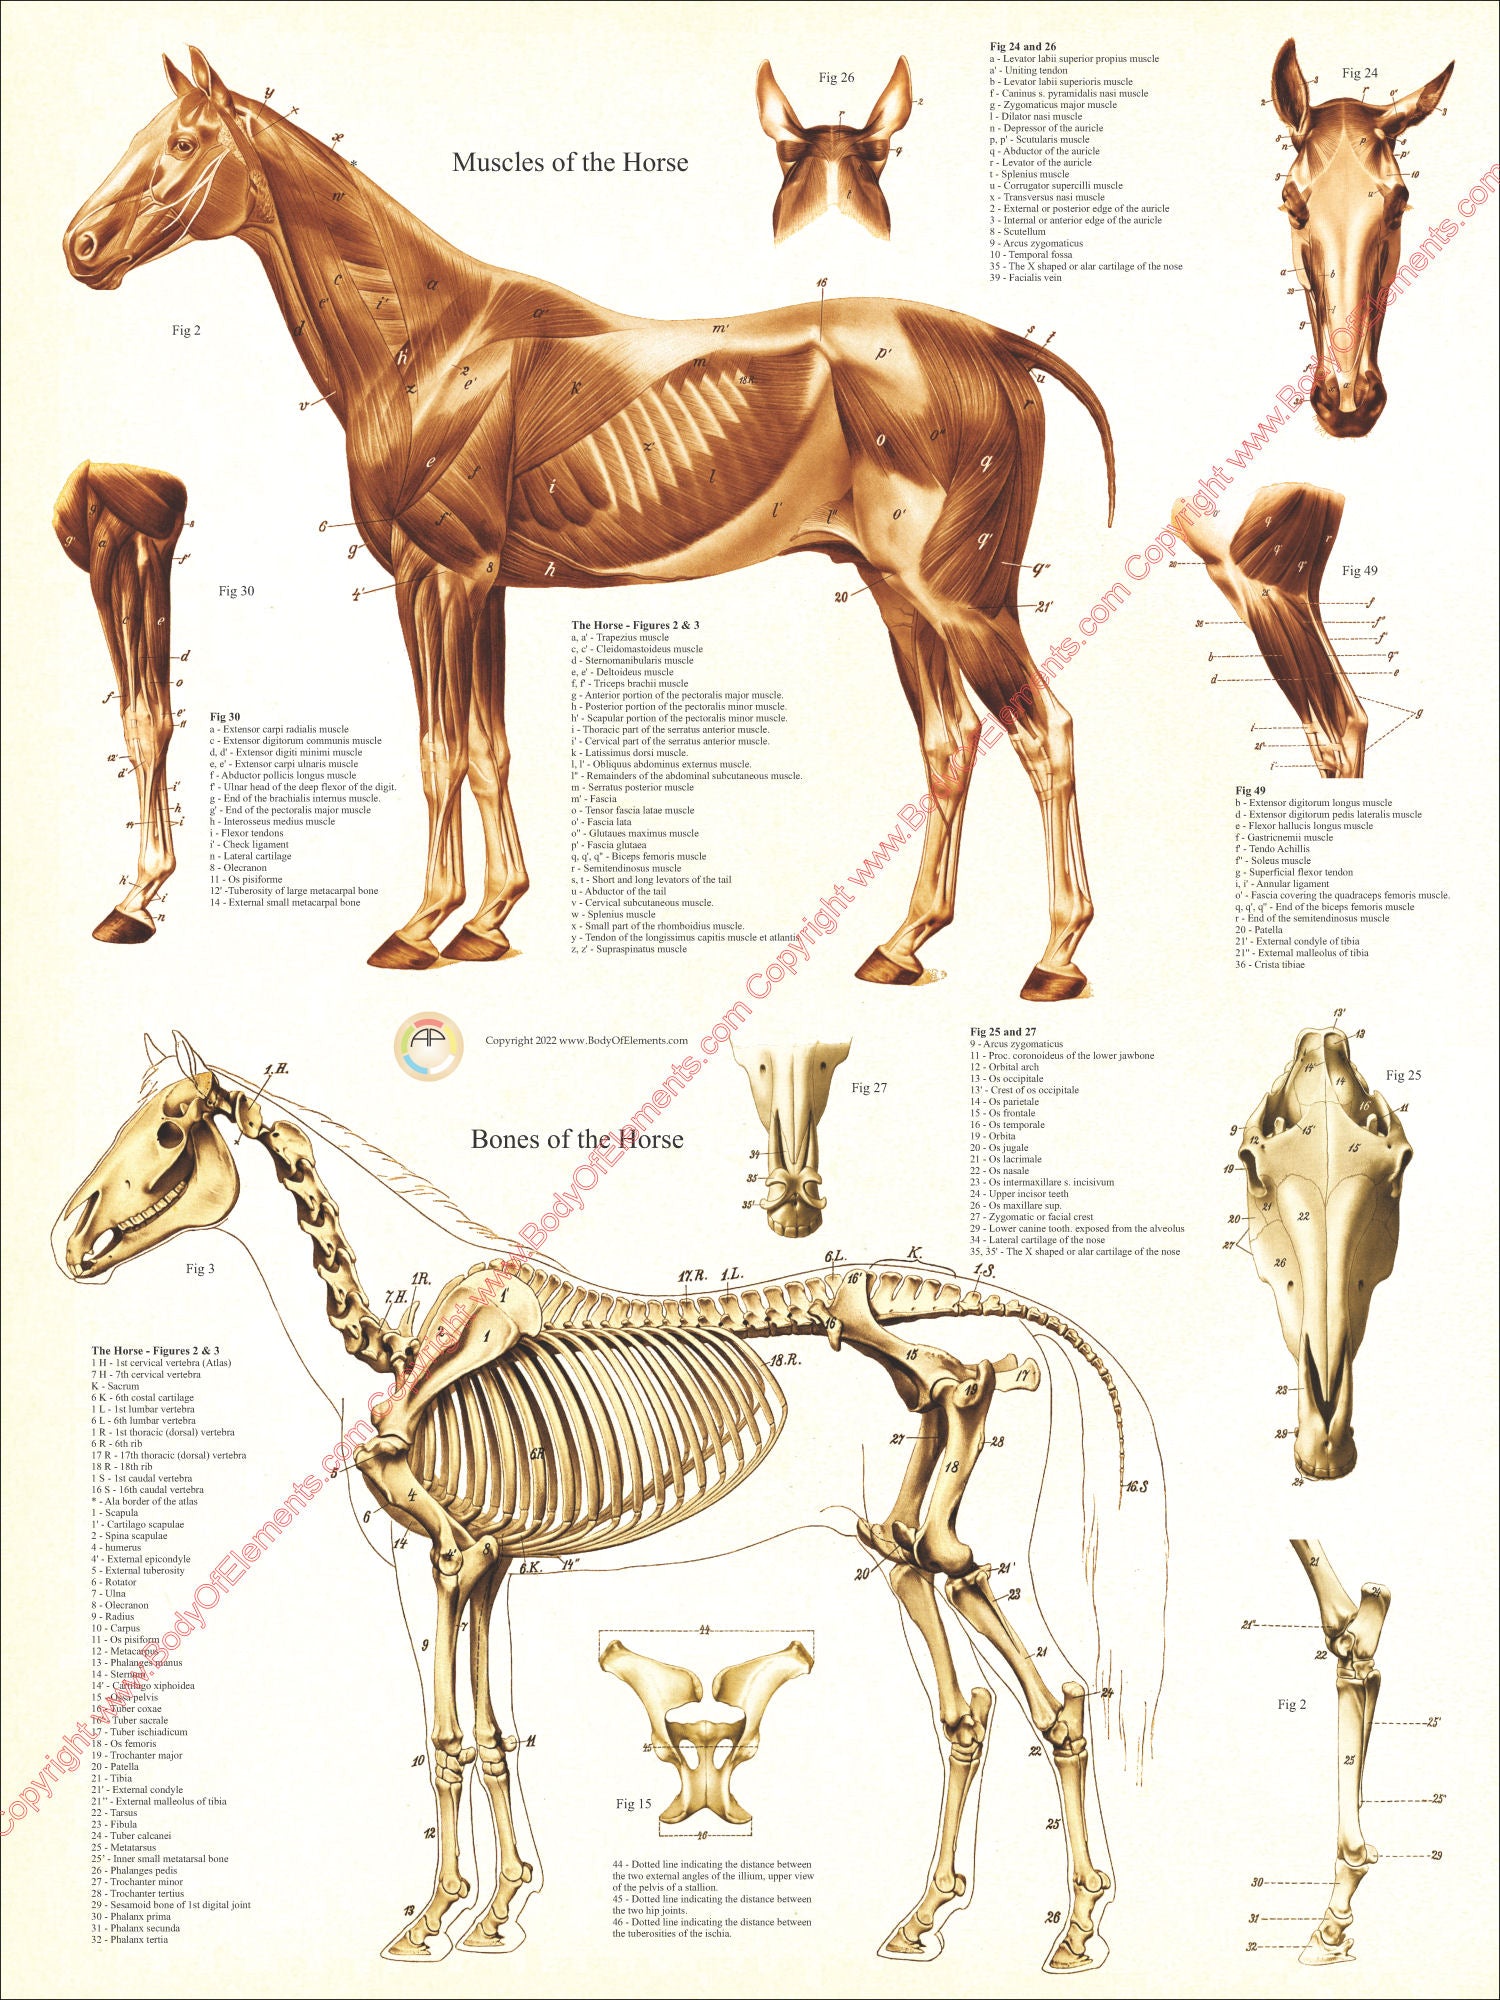 Horse muscle and skeletal anatomy chart